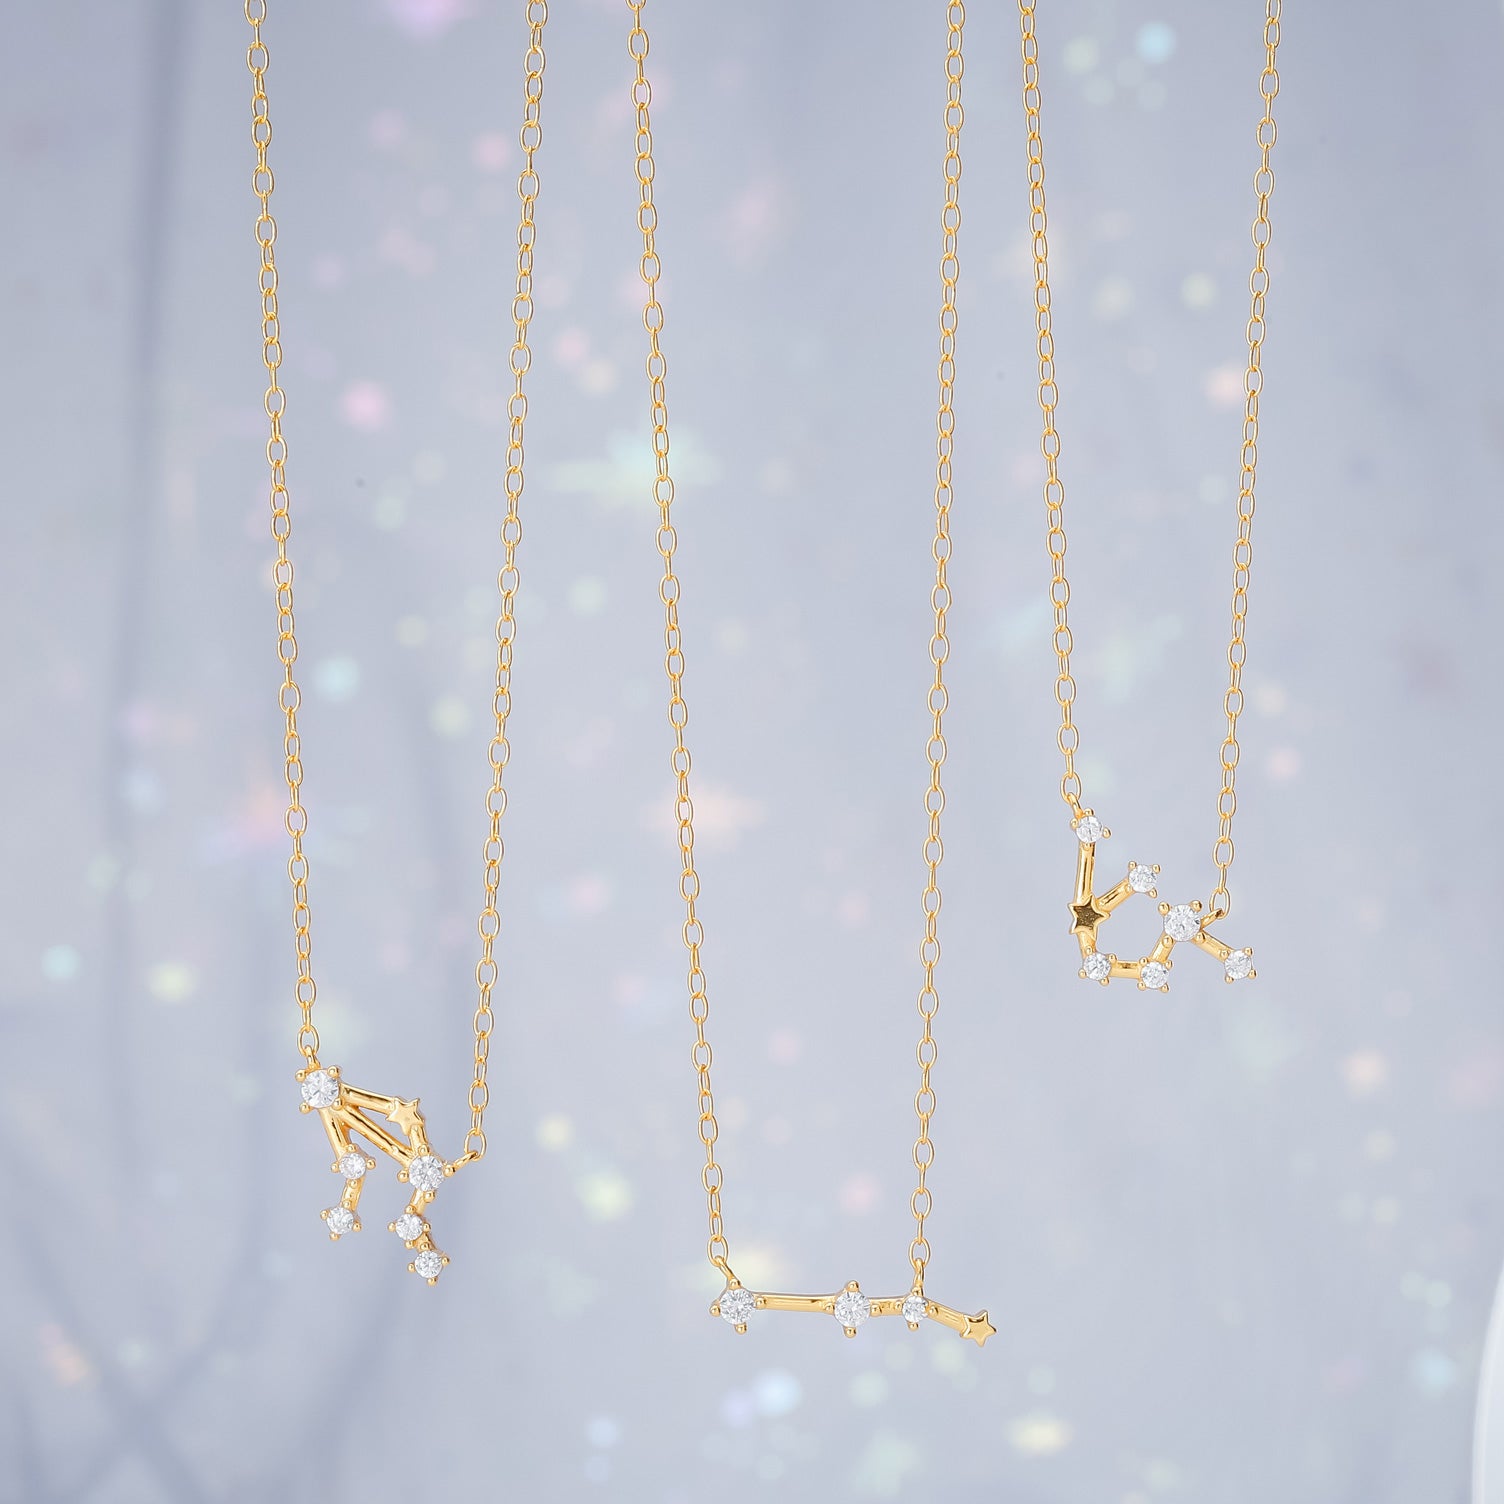 Silver Aries Constellation Necklace Set